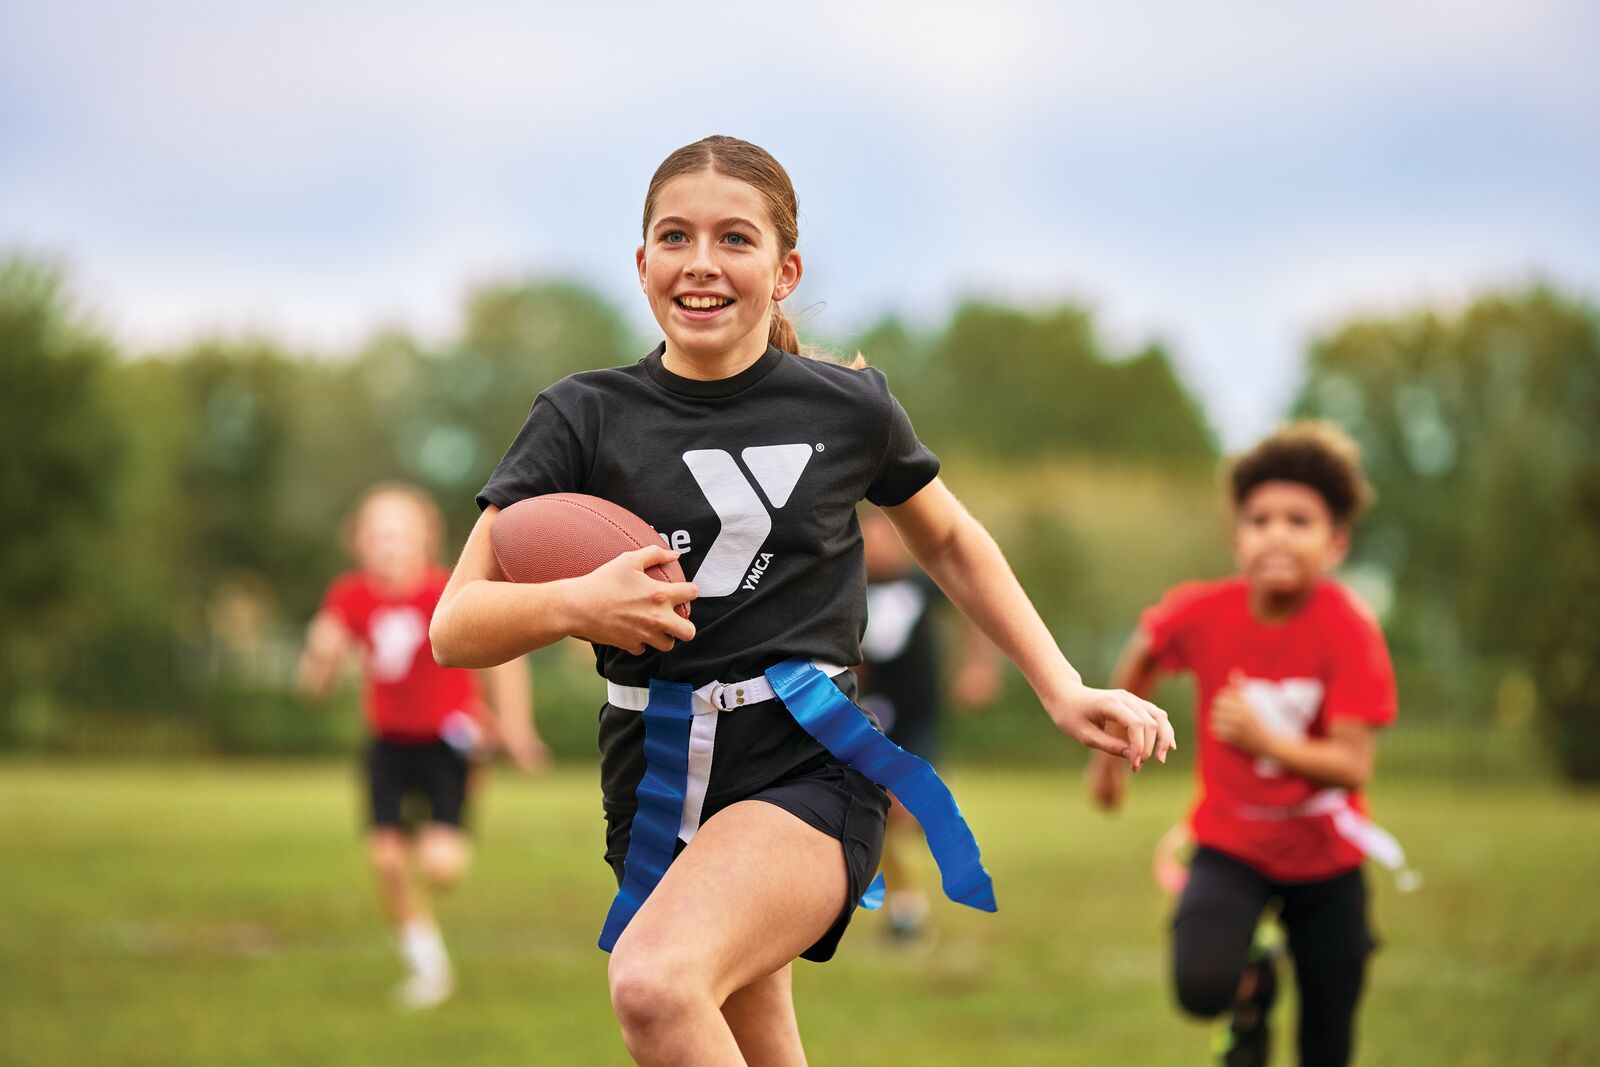 Girl running with football in flag football game while wearing a YMCA uniform